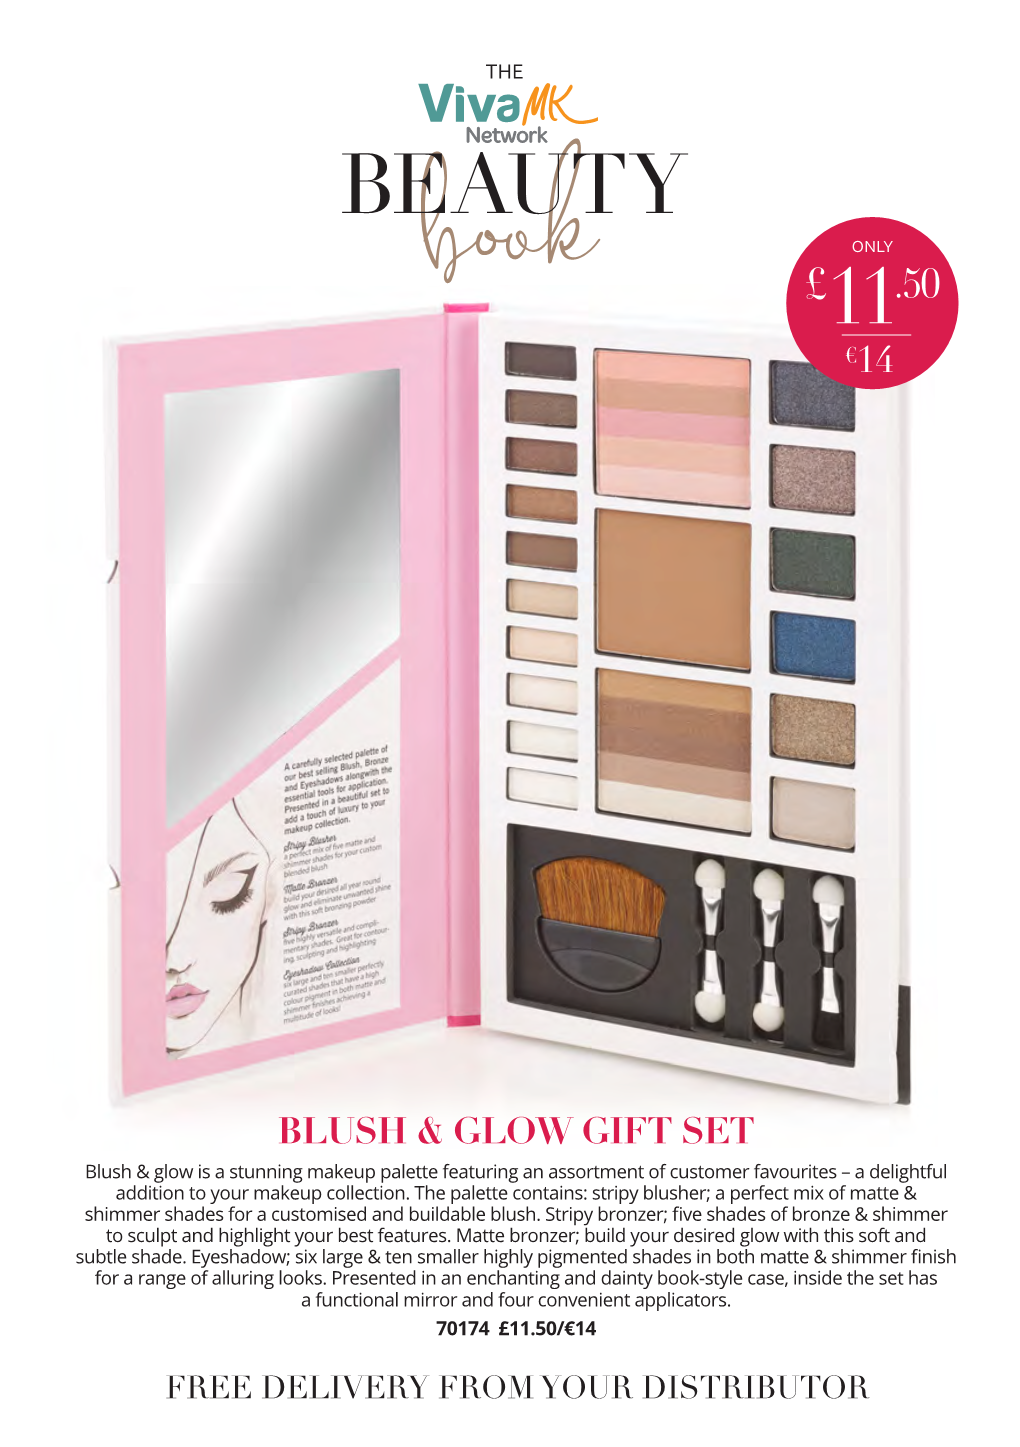 Beauty Only £11.50 €14